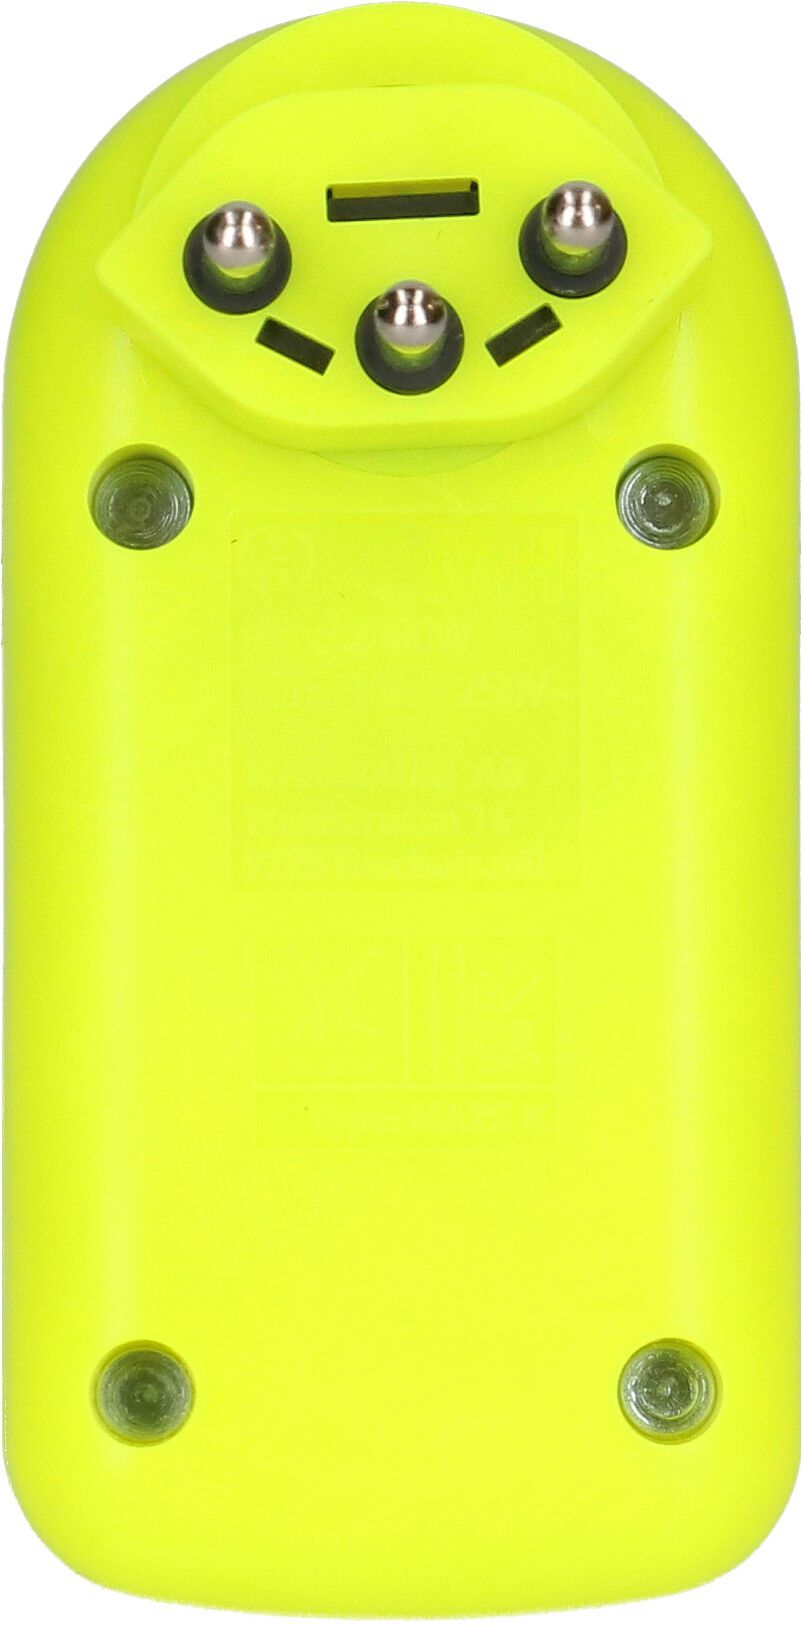 Adaptor 2x type 13 turnable switch fluo-yellow